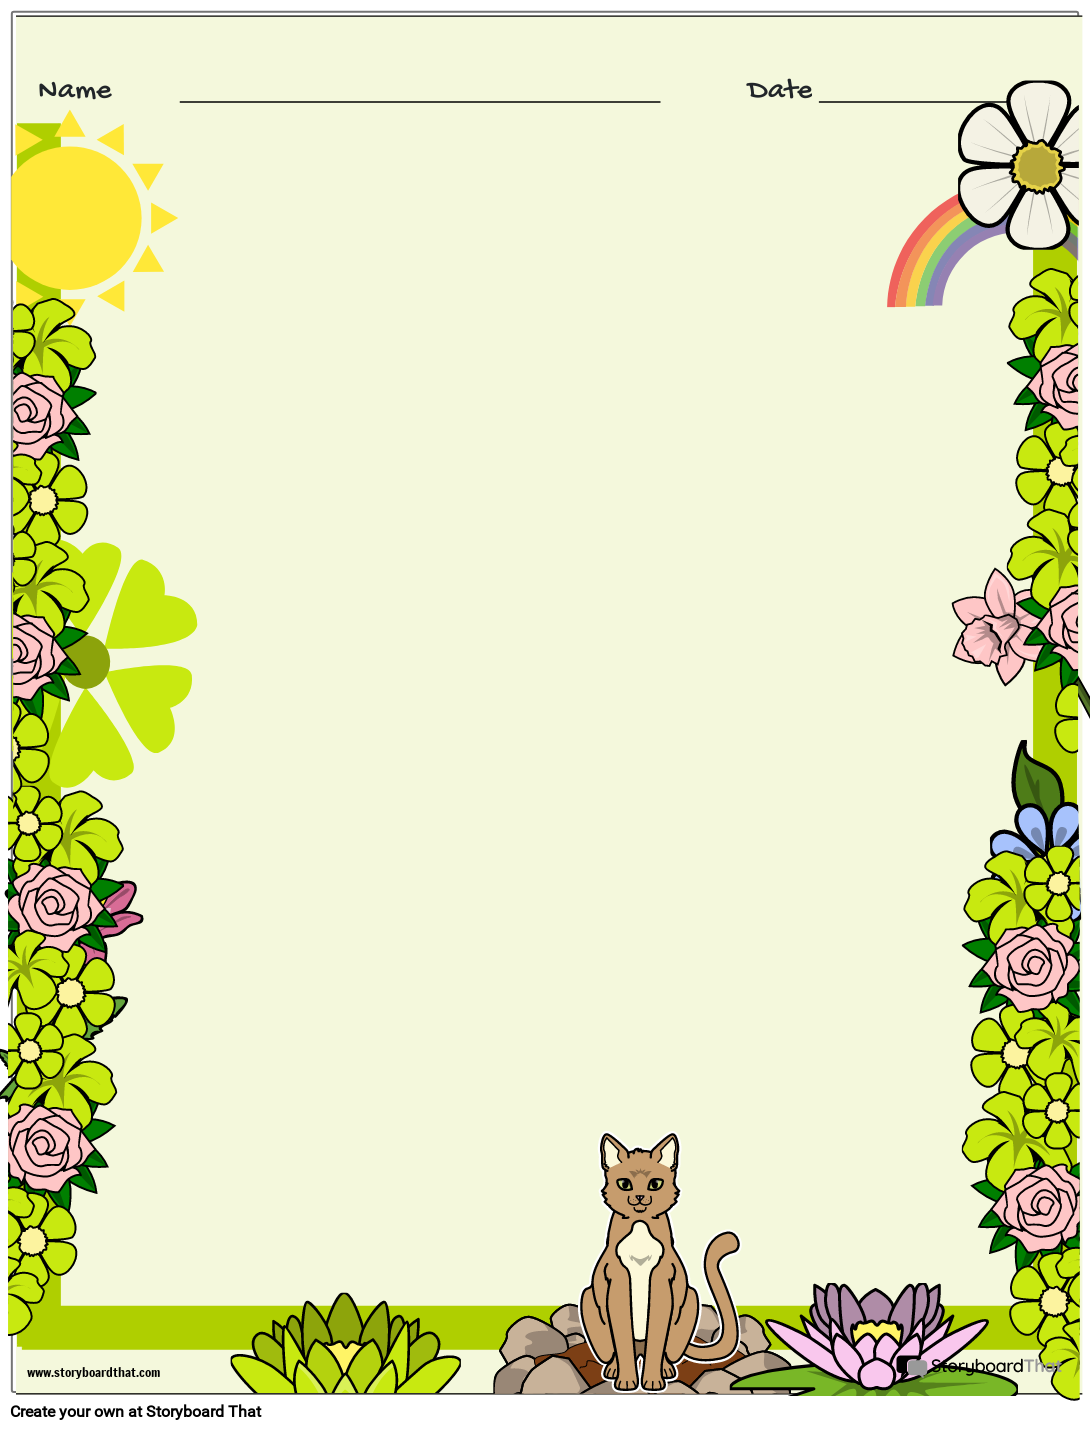 Colorful Blank Page Worksheet Design with Garden Theme